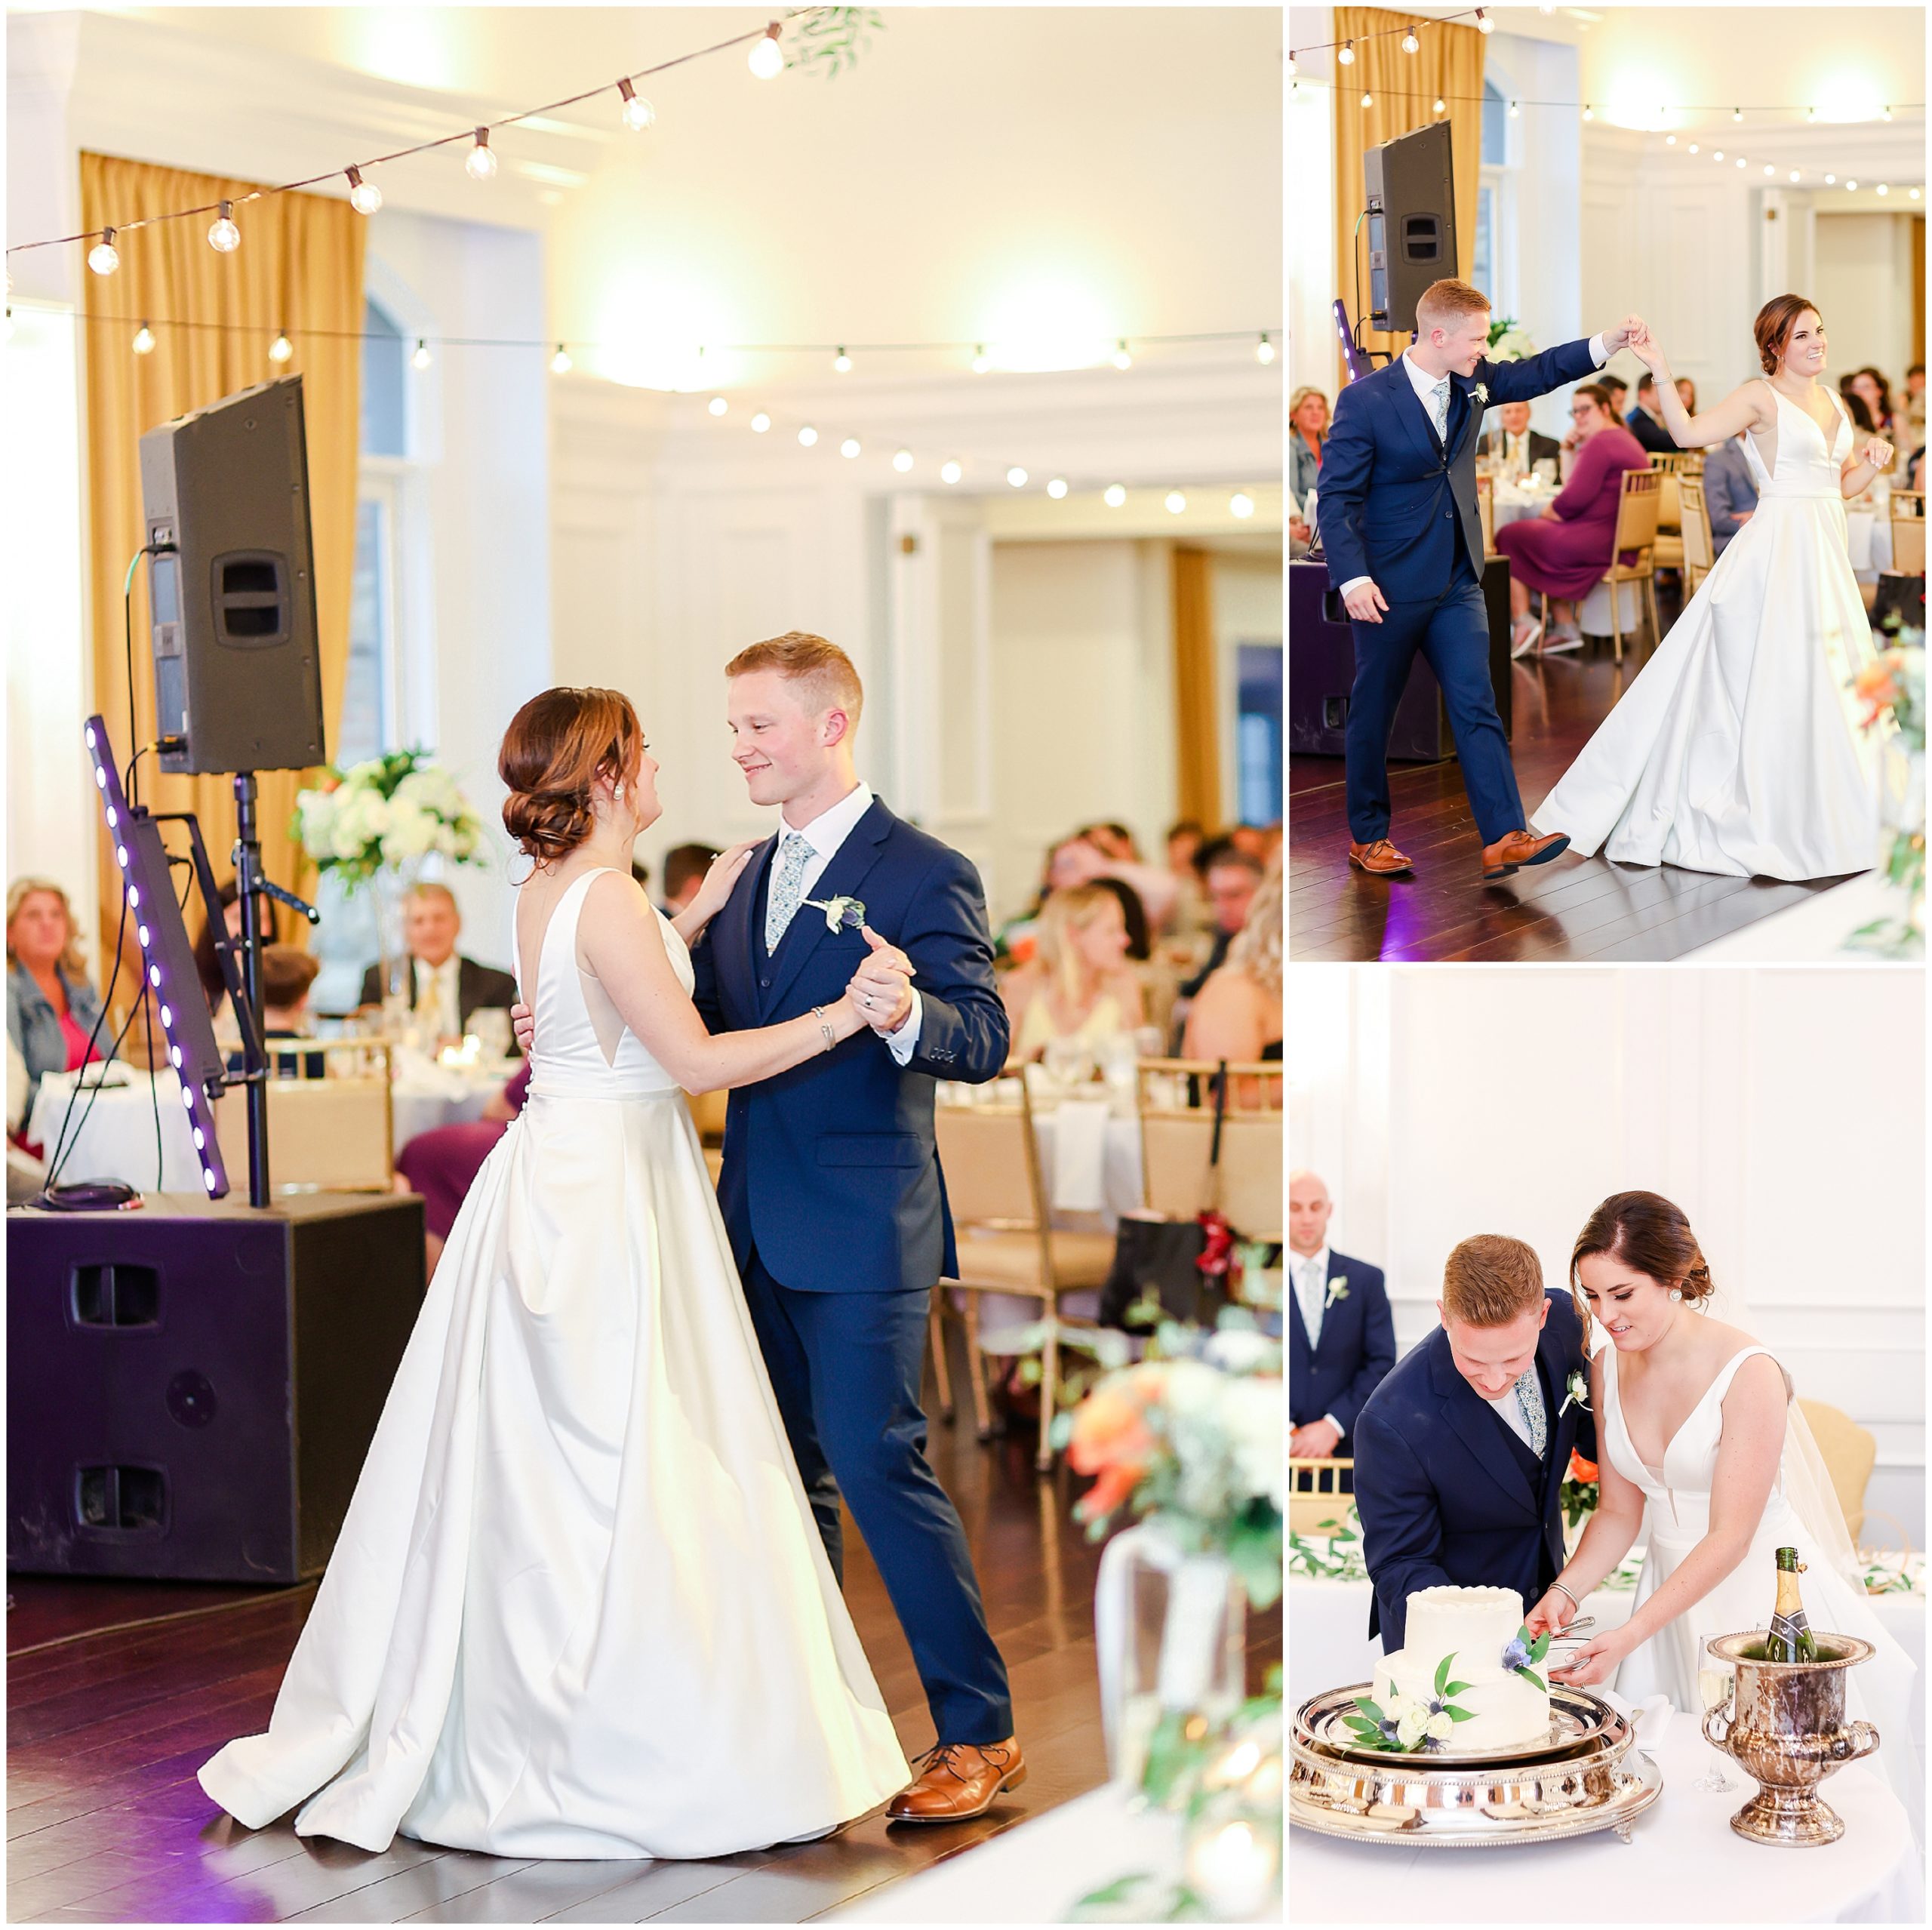 first dances and cake cutting at wedding reception 